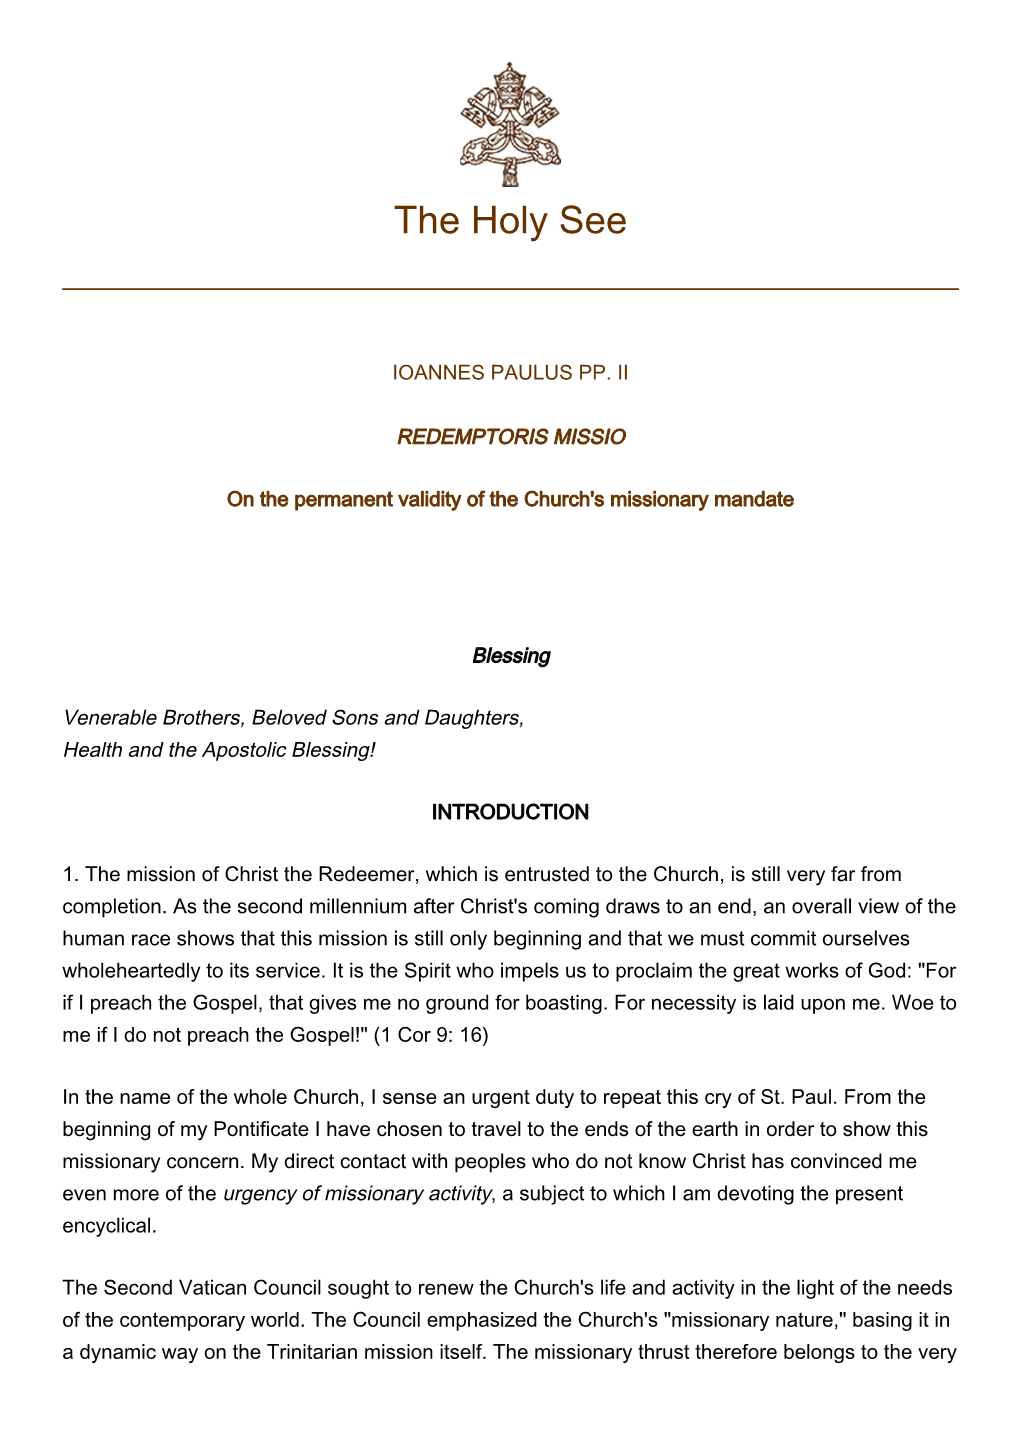 The Holy See